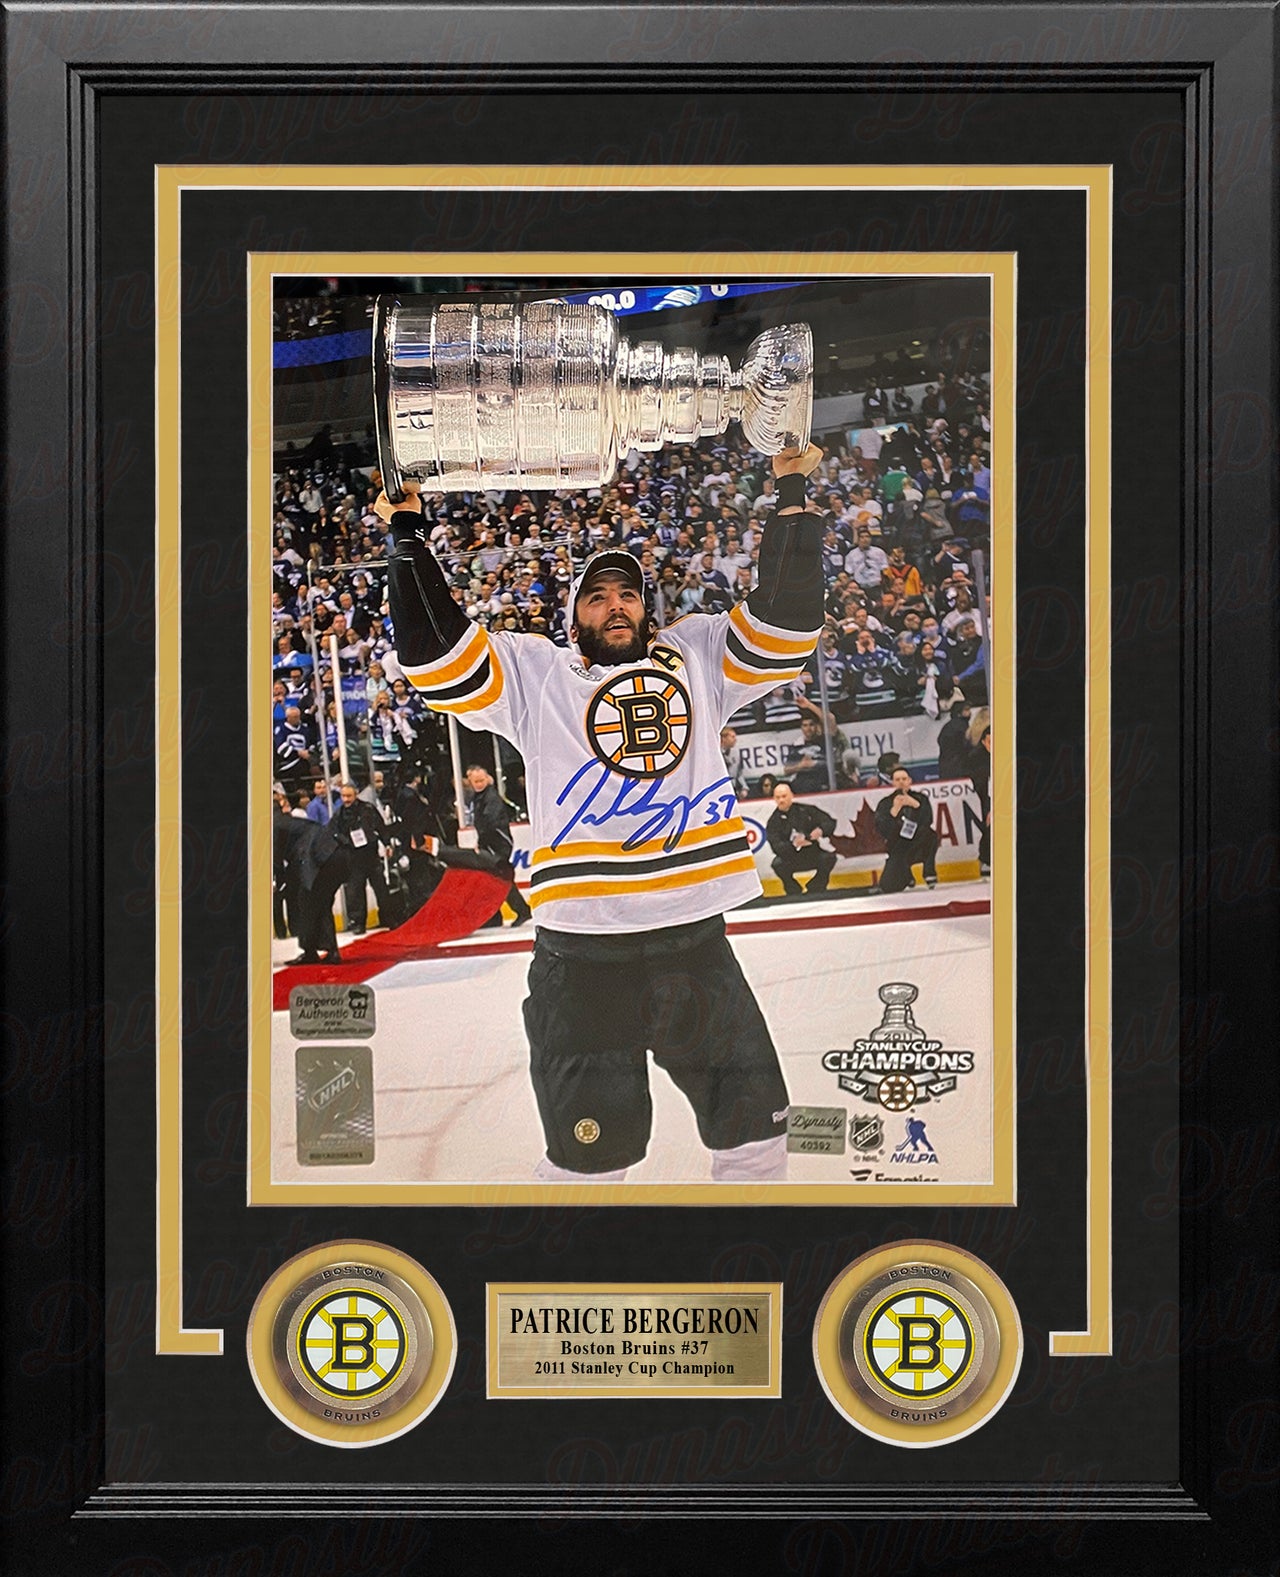 Patrice Bergeron 2011 Stanley Cup Boston Bruins Autographed 8" x 10" Framed Hockey Photo